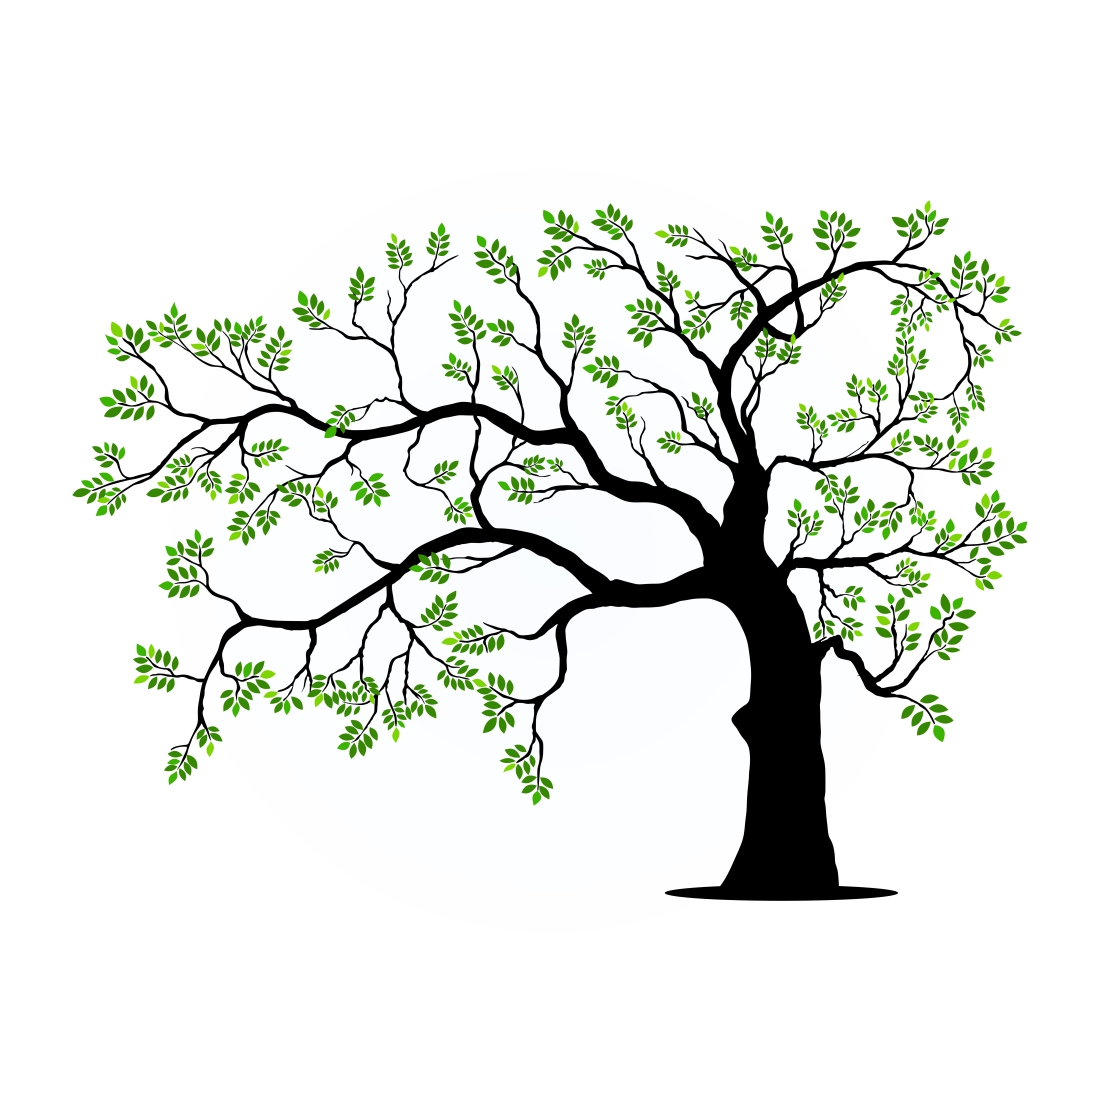 Black Tree with green leaves cover image.